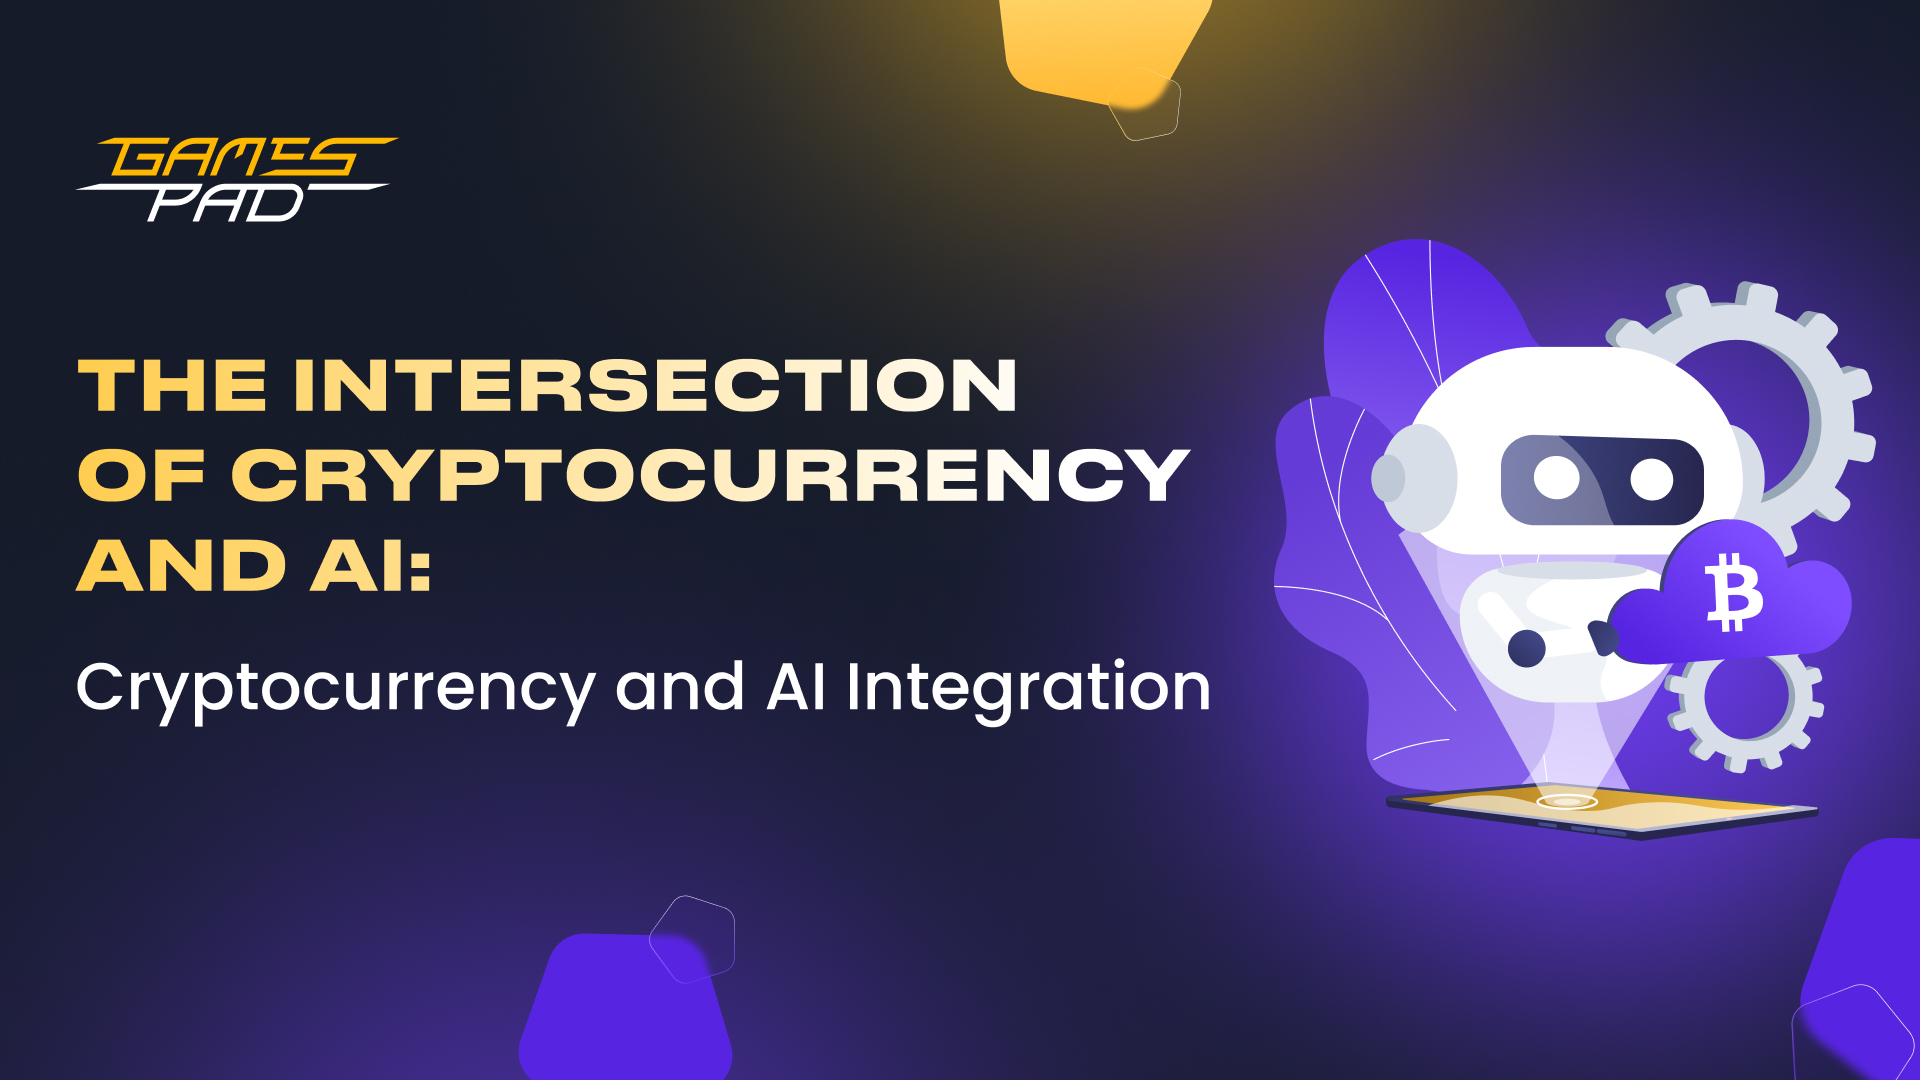 GamesPad: The Intersection of Cryptocurrency and AI: Cryptocurrency and AI Integration 1